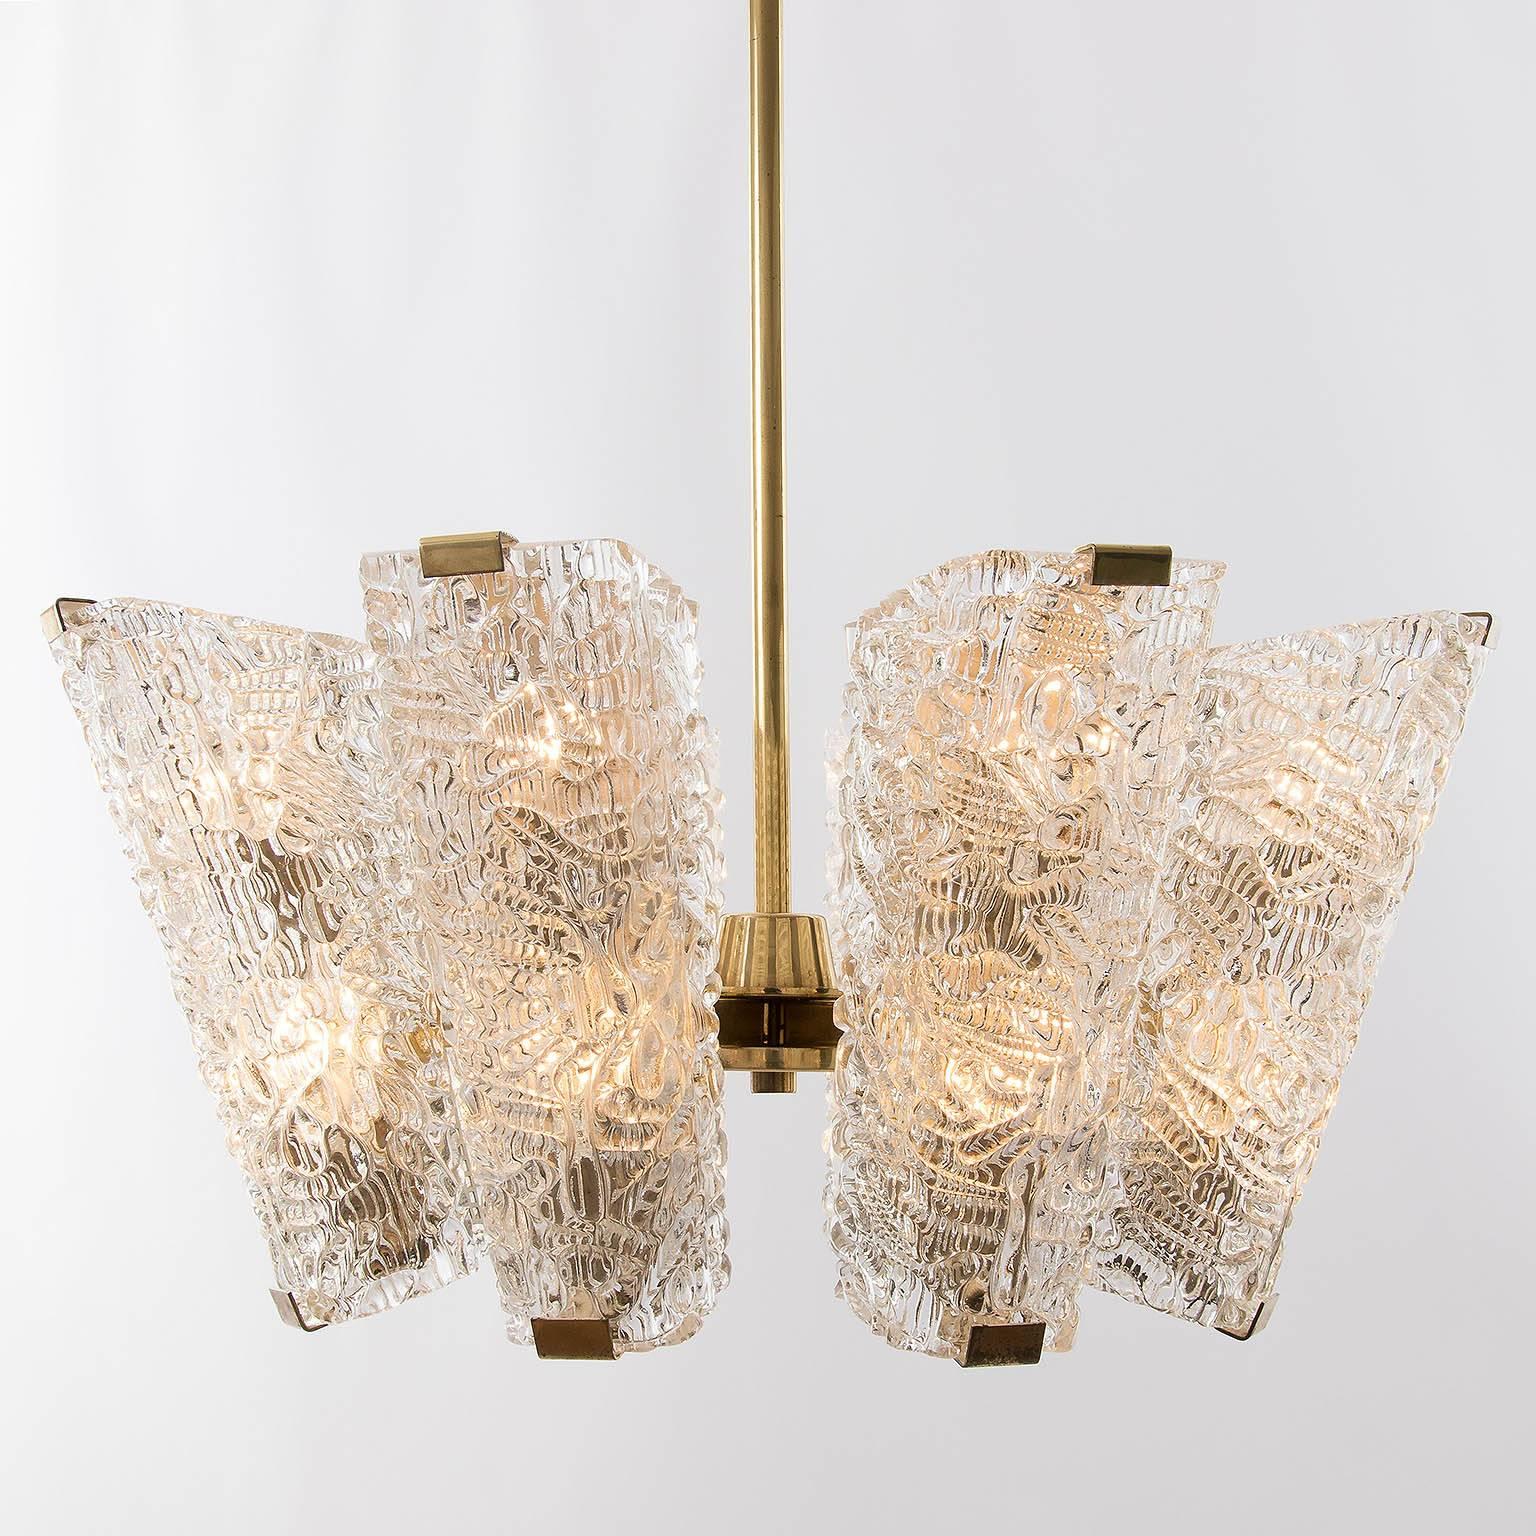 Large Kalmar Chandelier, Brass and Textured Glass, 1950s For Sale 2